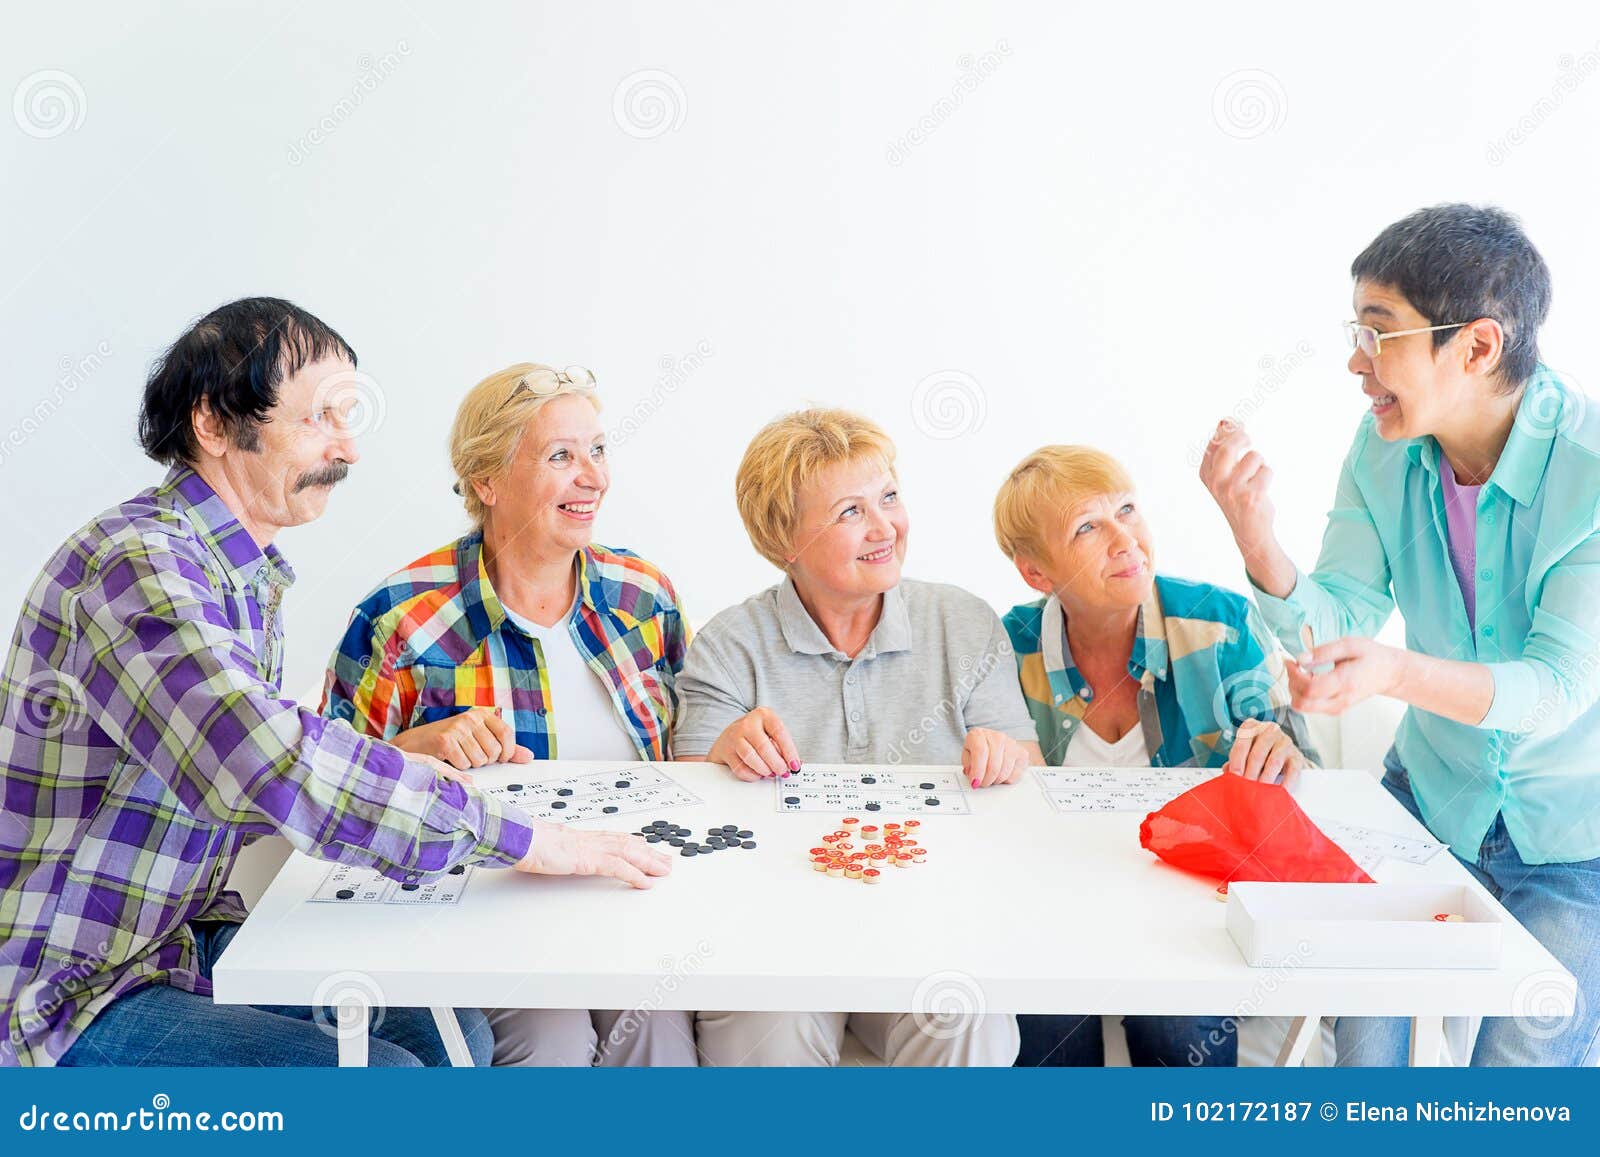 473 Board Games Adults Stock Photos - Free & Royalty-Free Stock